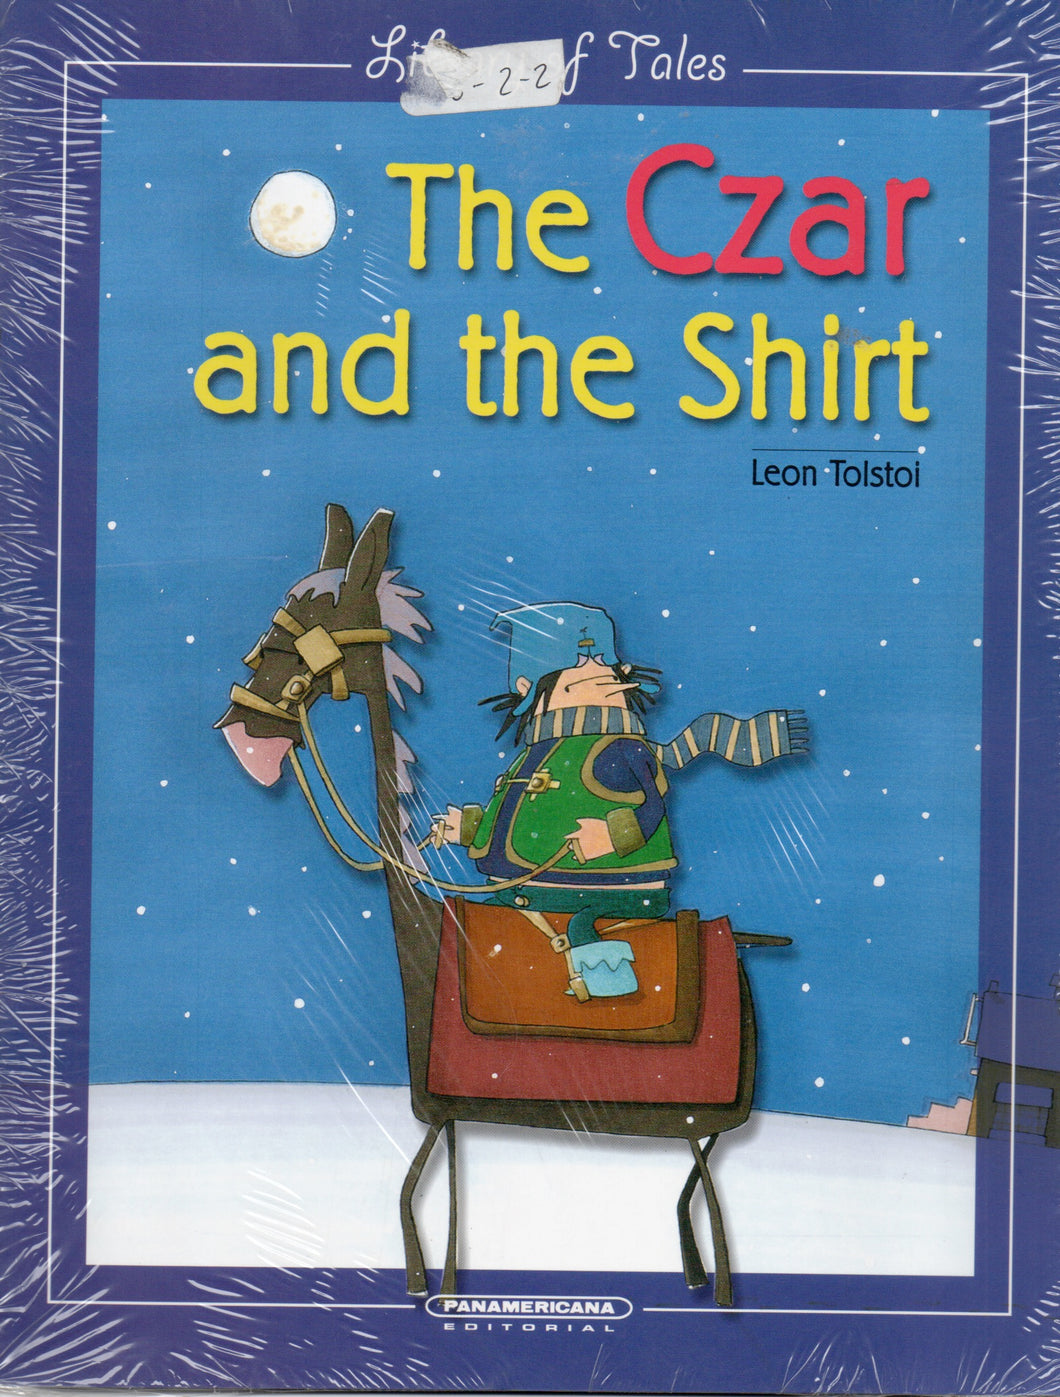 Cuento The Czar and the Shirt